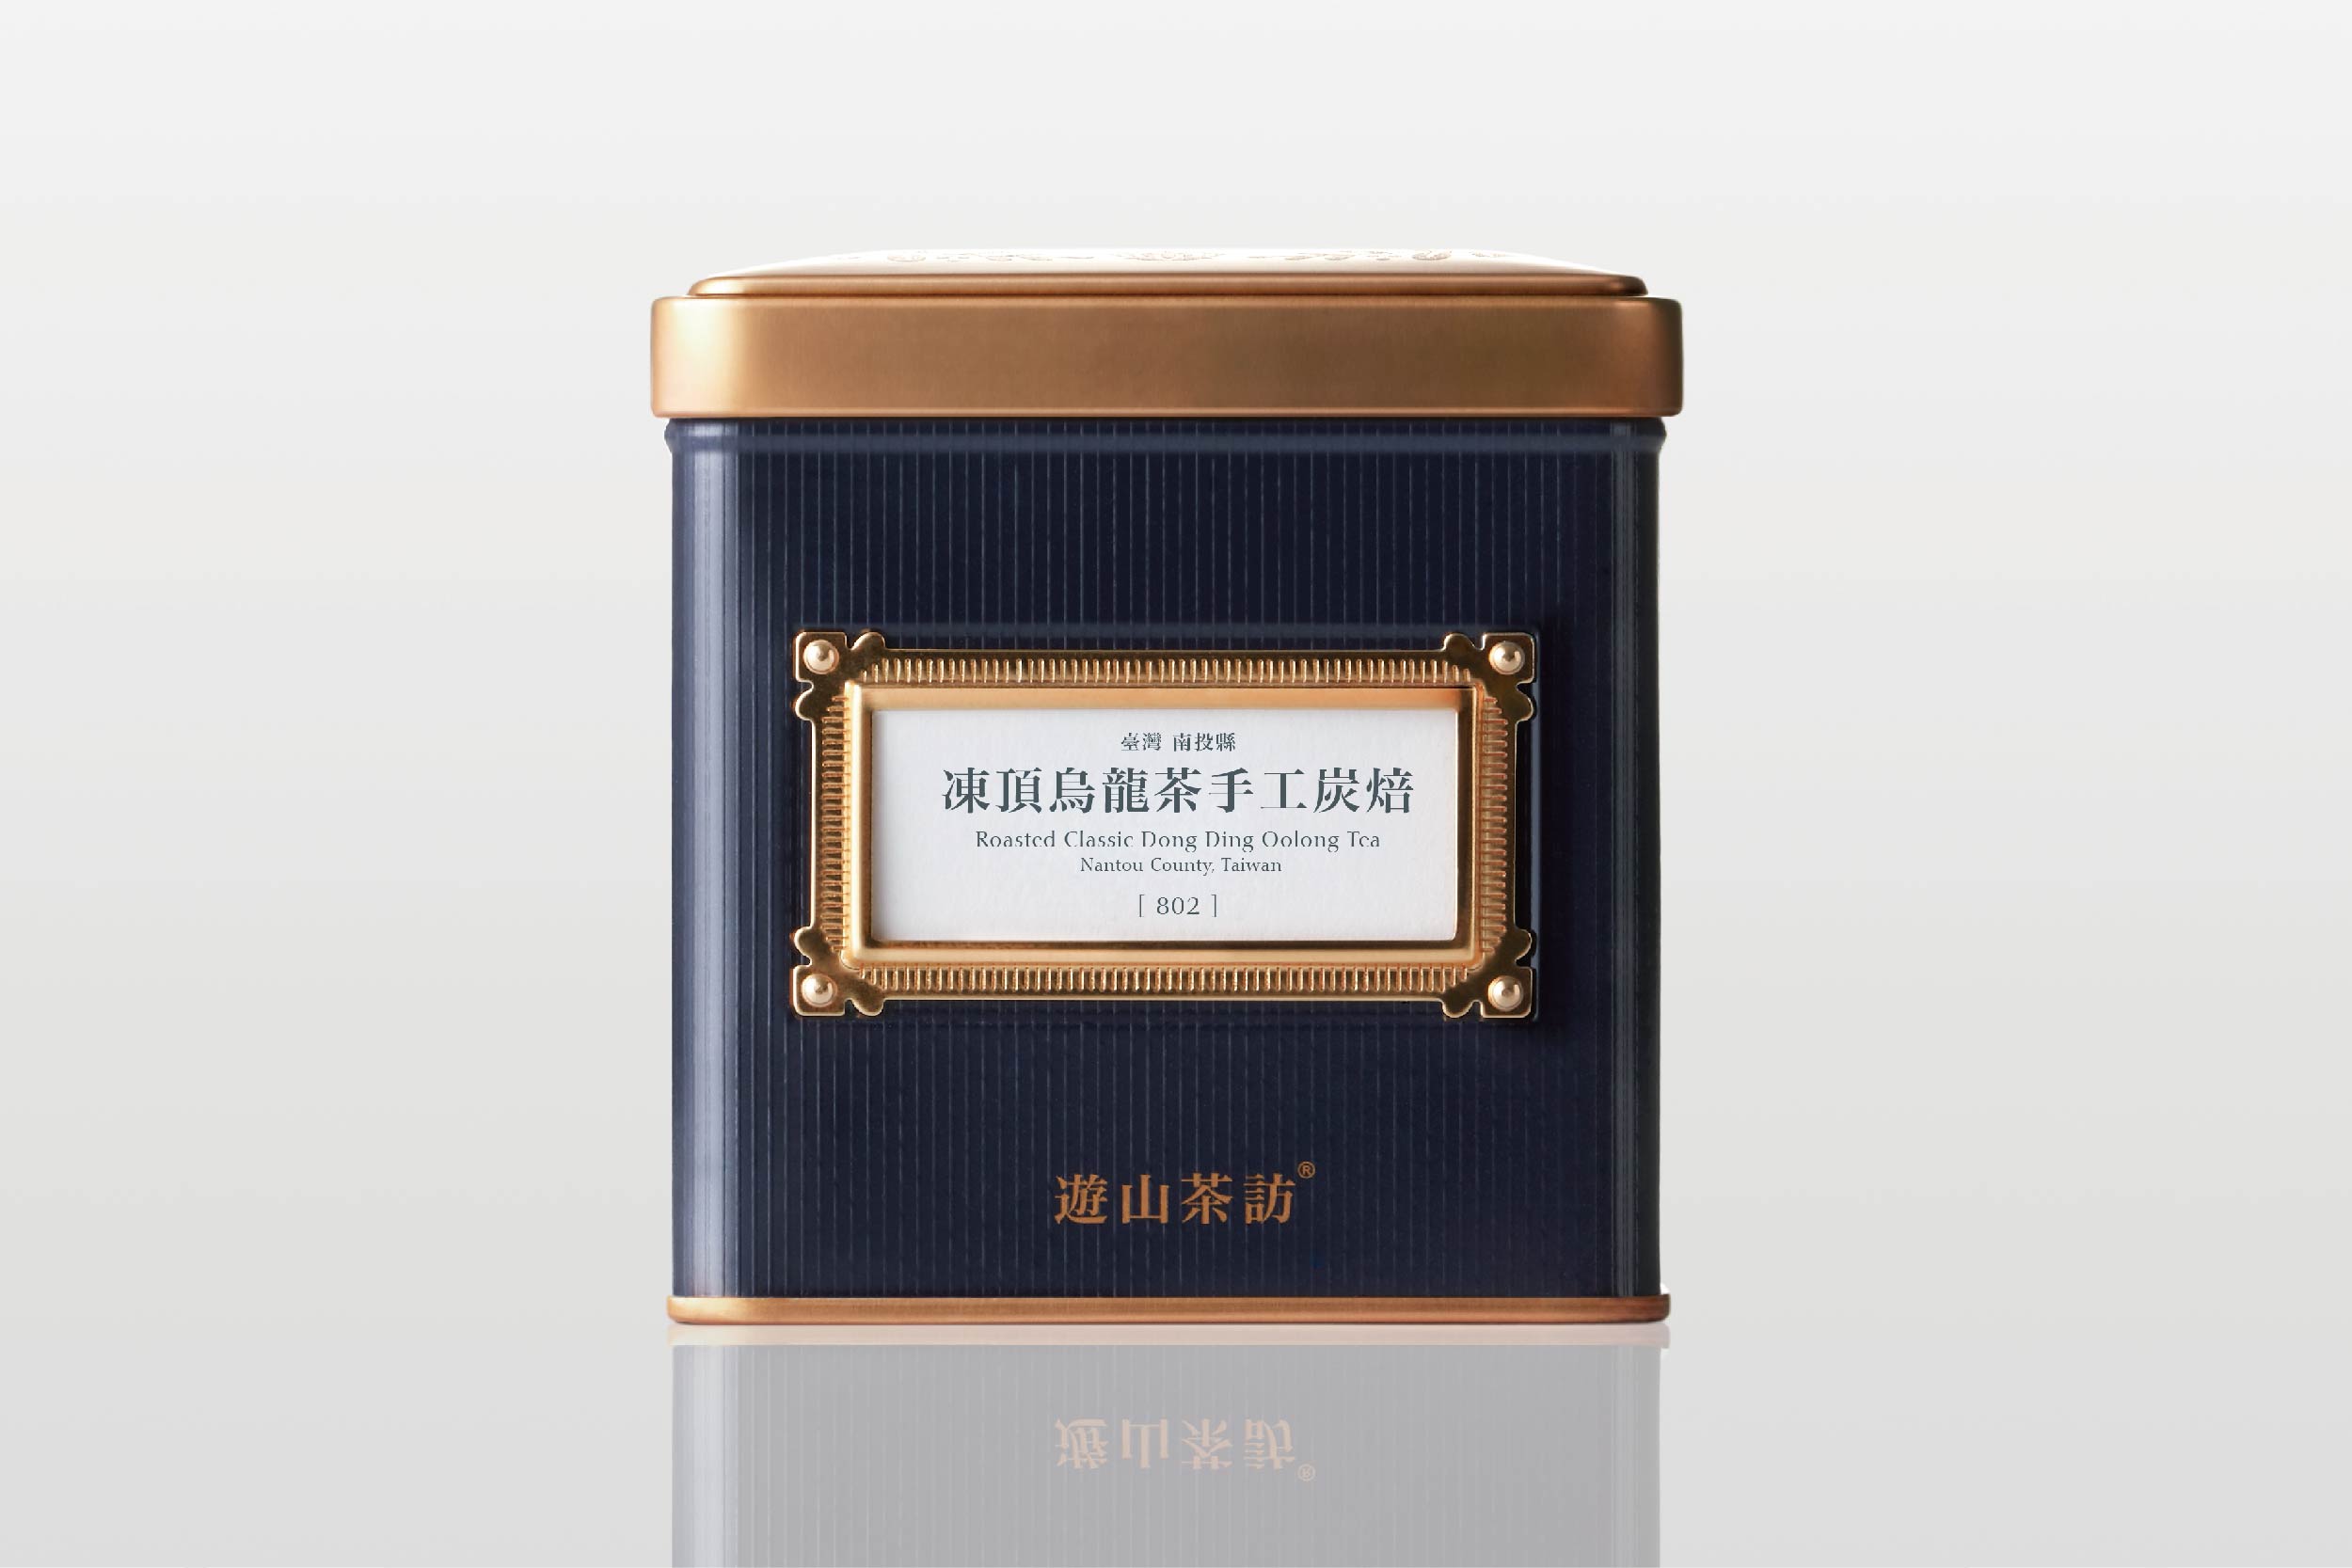 Roasted Classic Dong Ding Oolong Tea